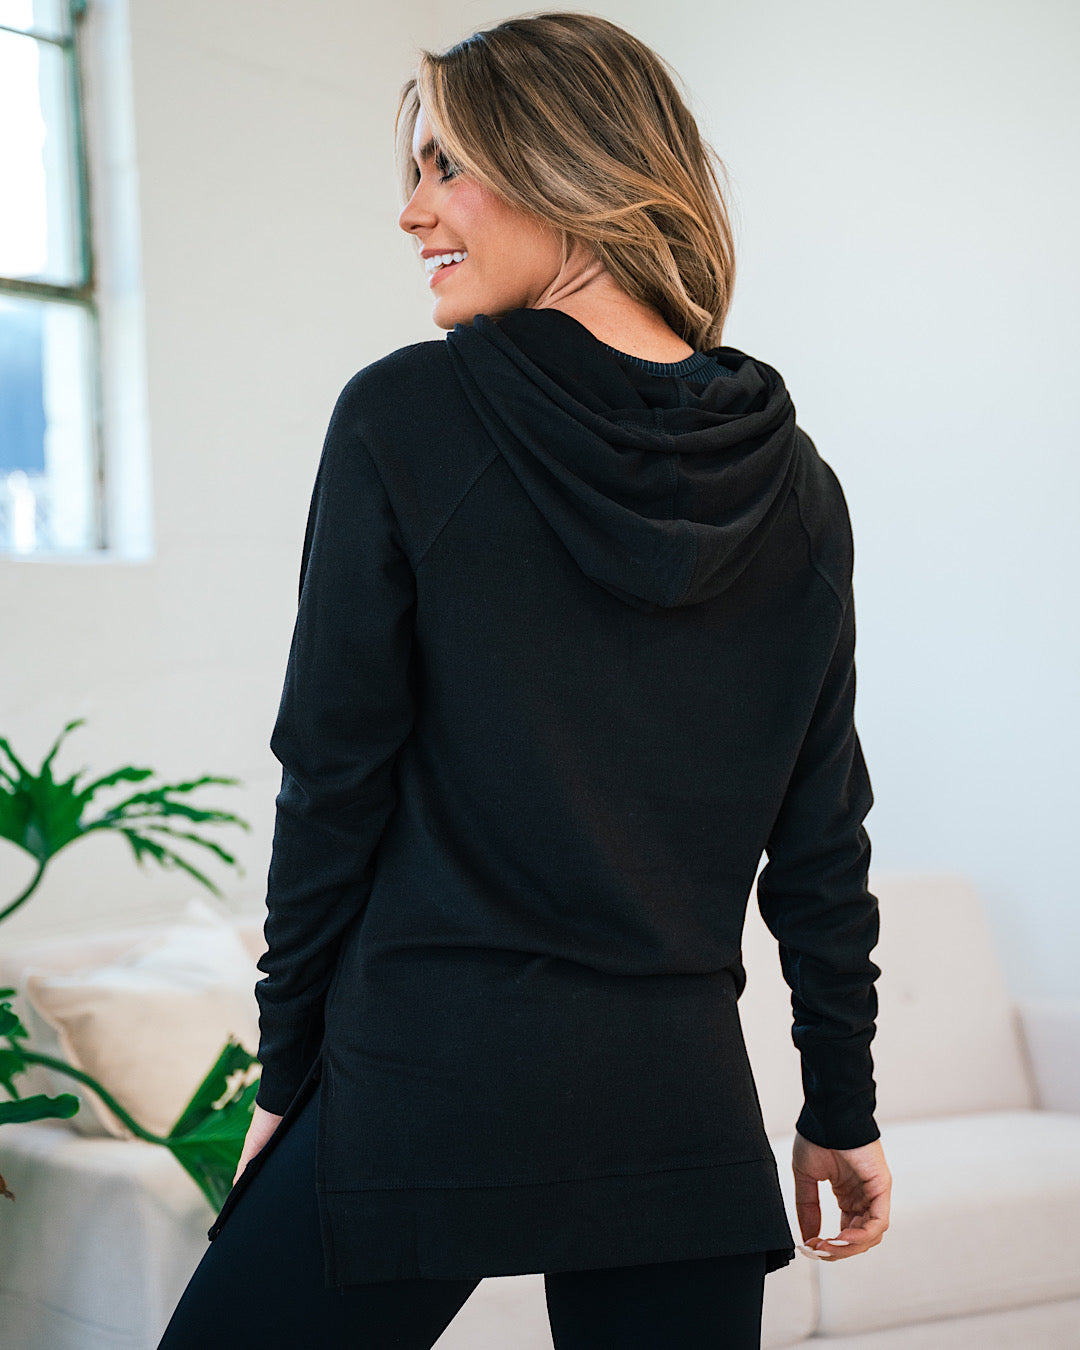 NEW! Ampersand Ave Sideslit Hoodie - Blackout  Ampersand Ave   